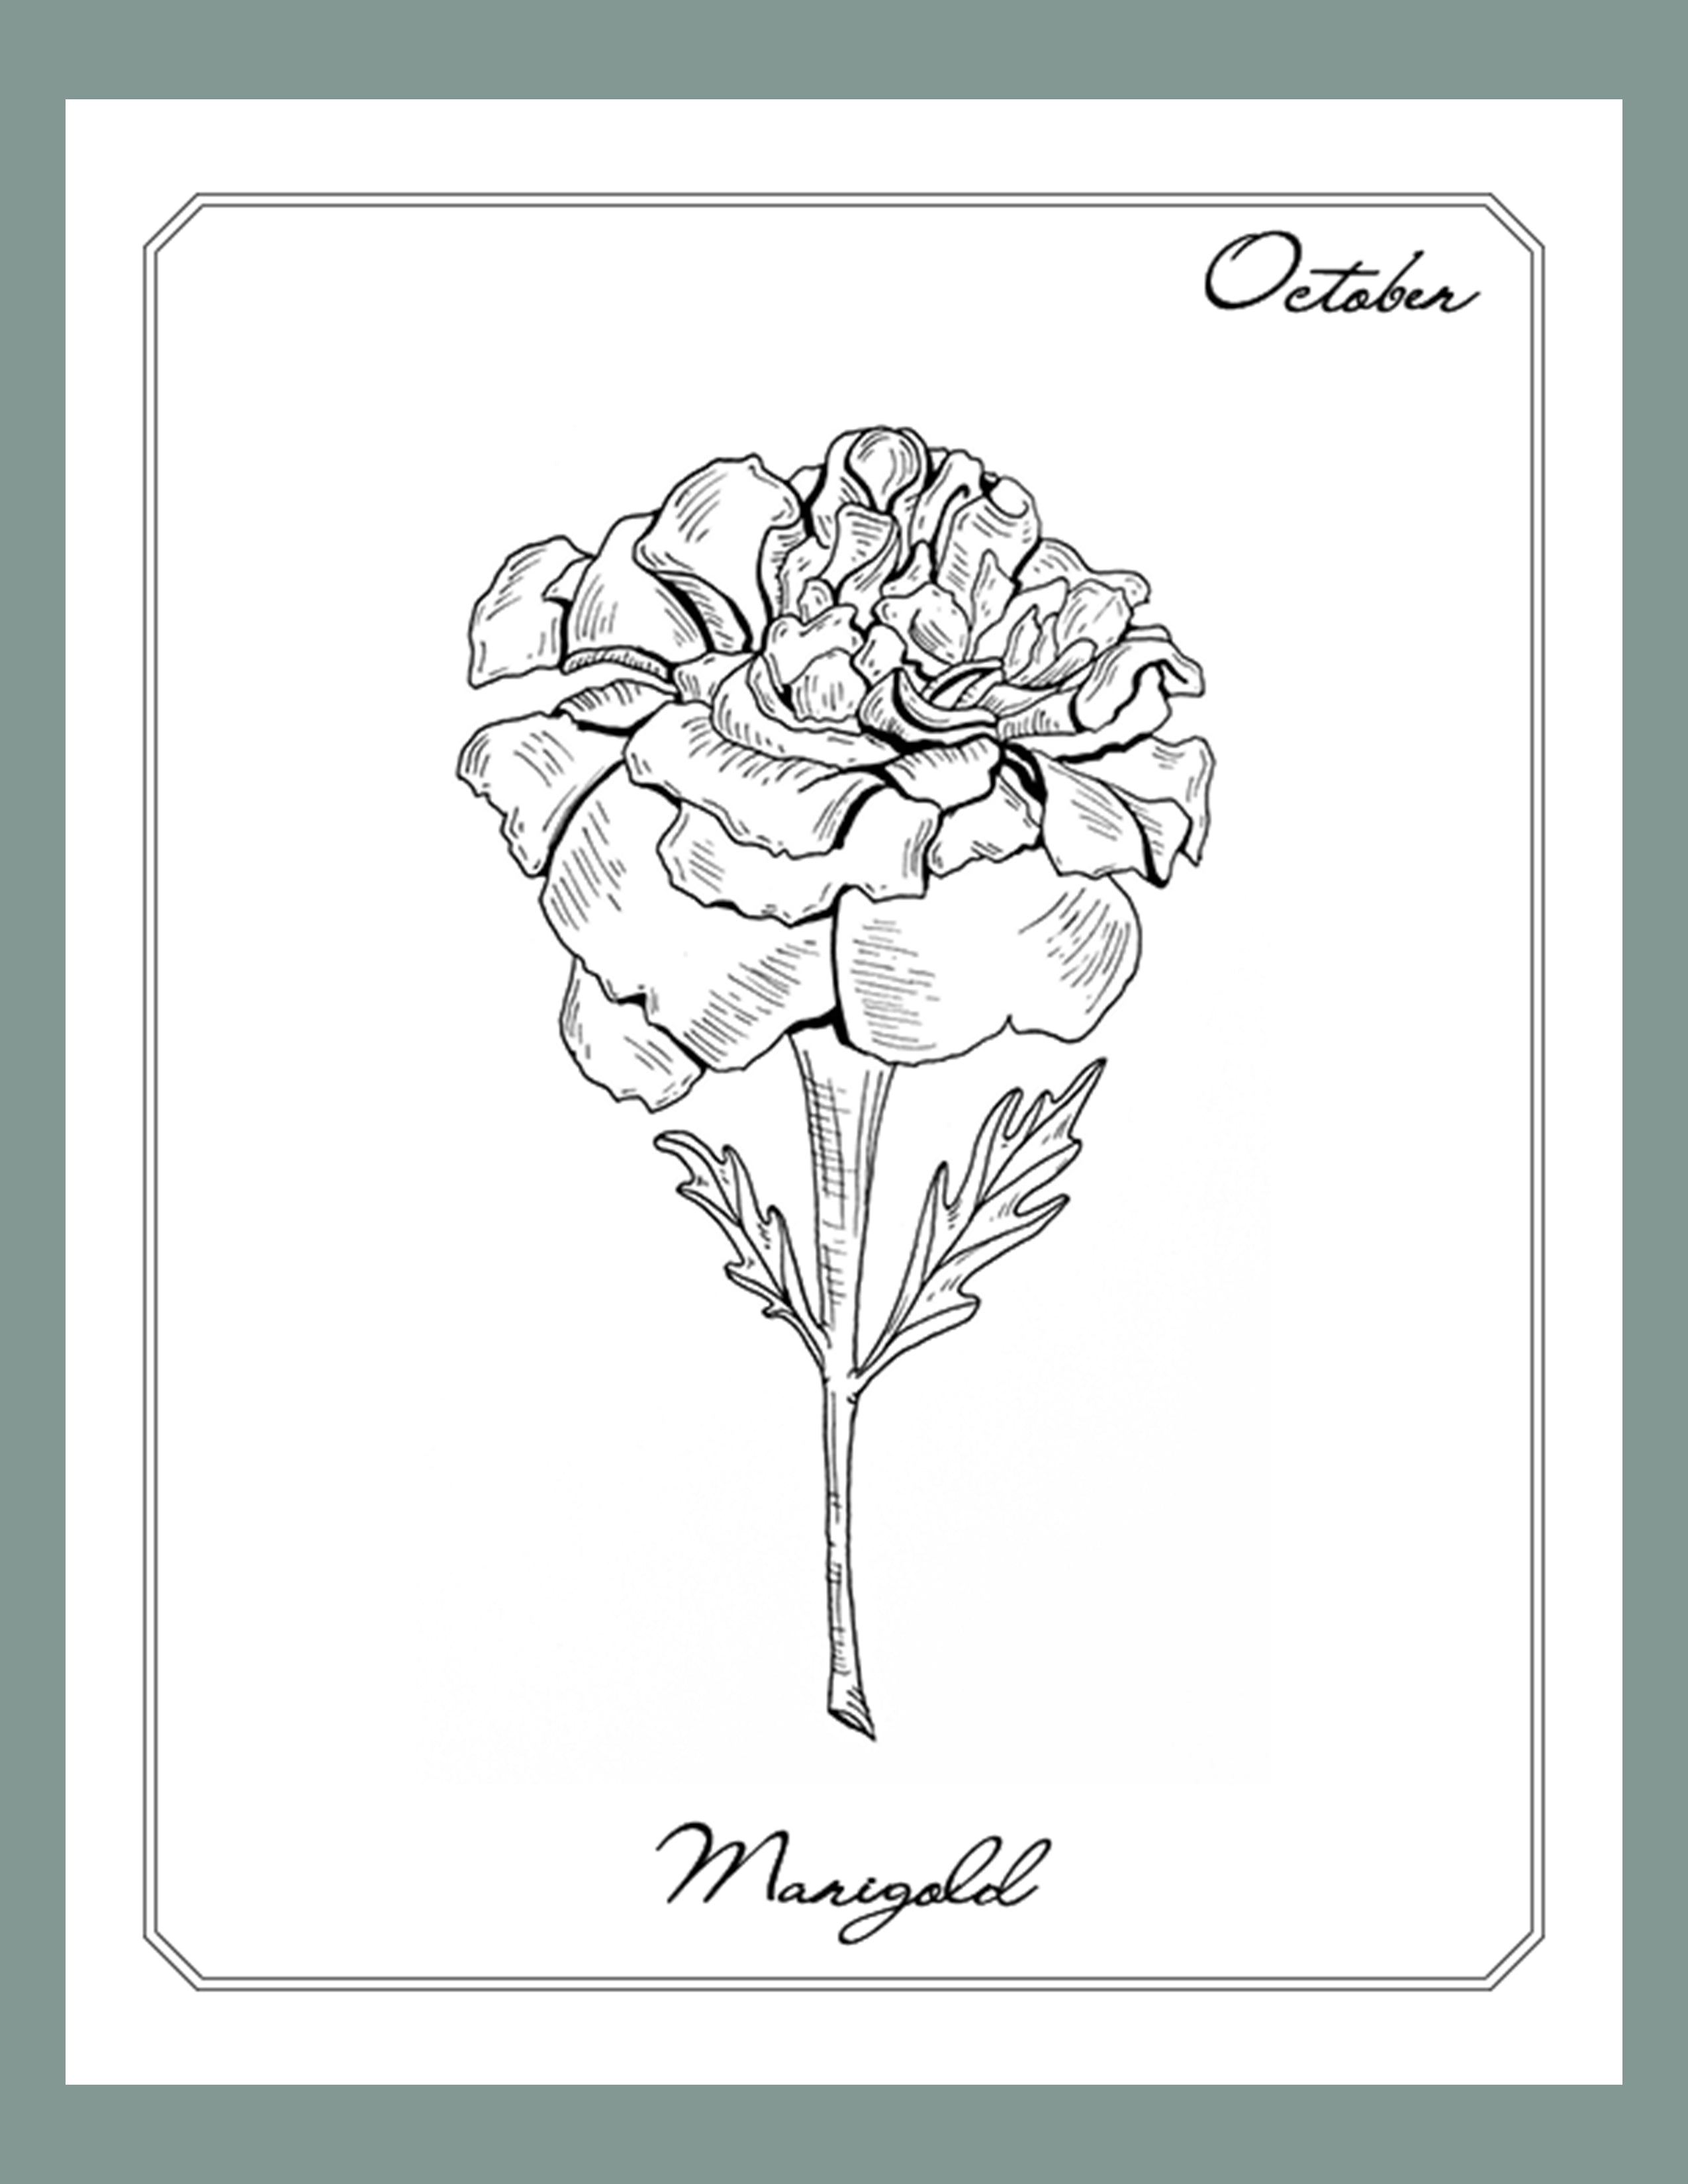 Marigold tattoo meaning